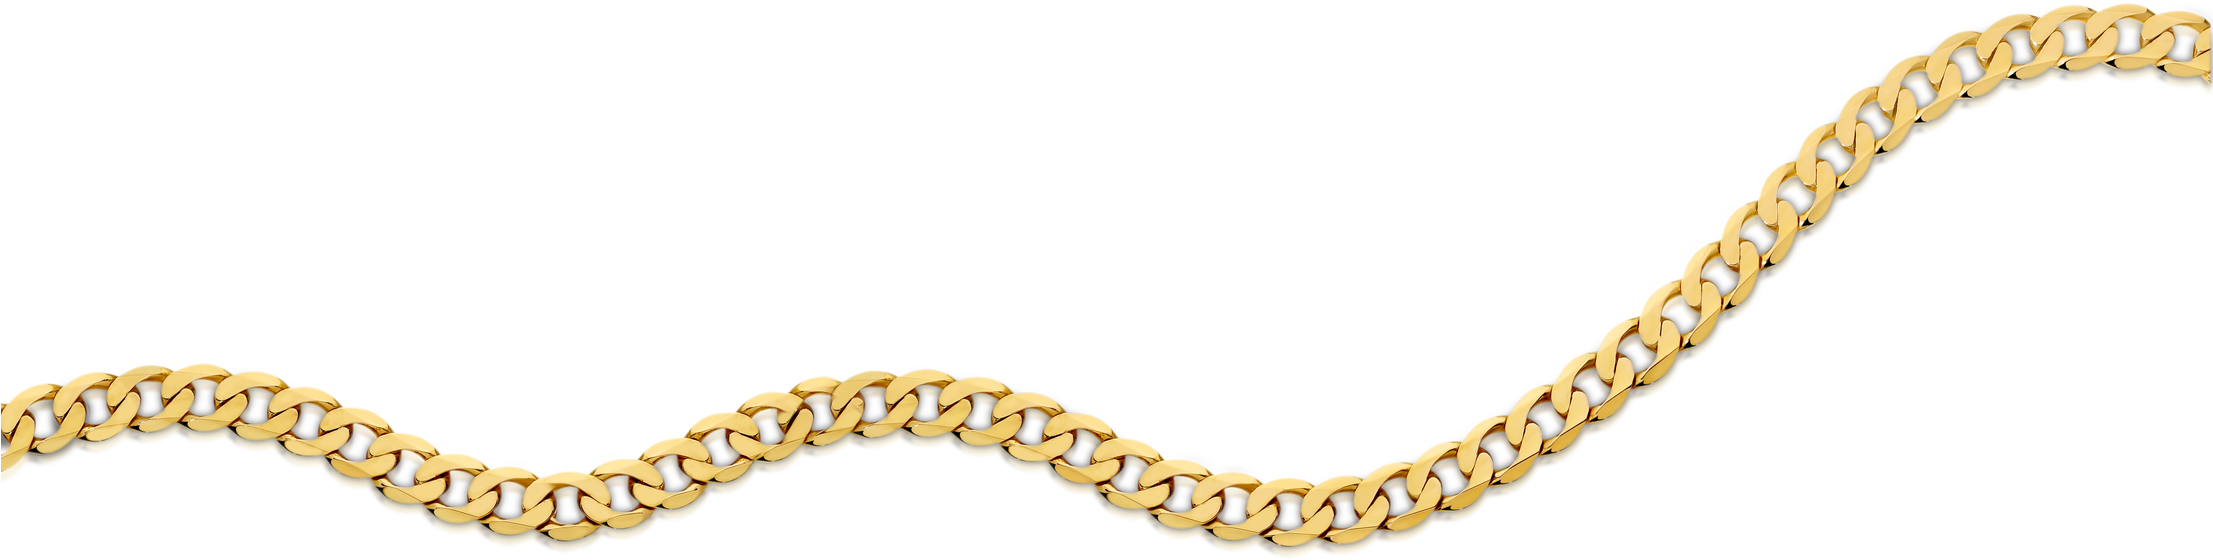 Golden Chain Wave Pattern PNG